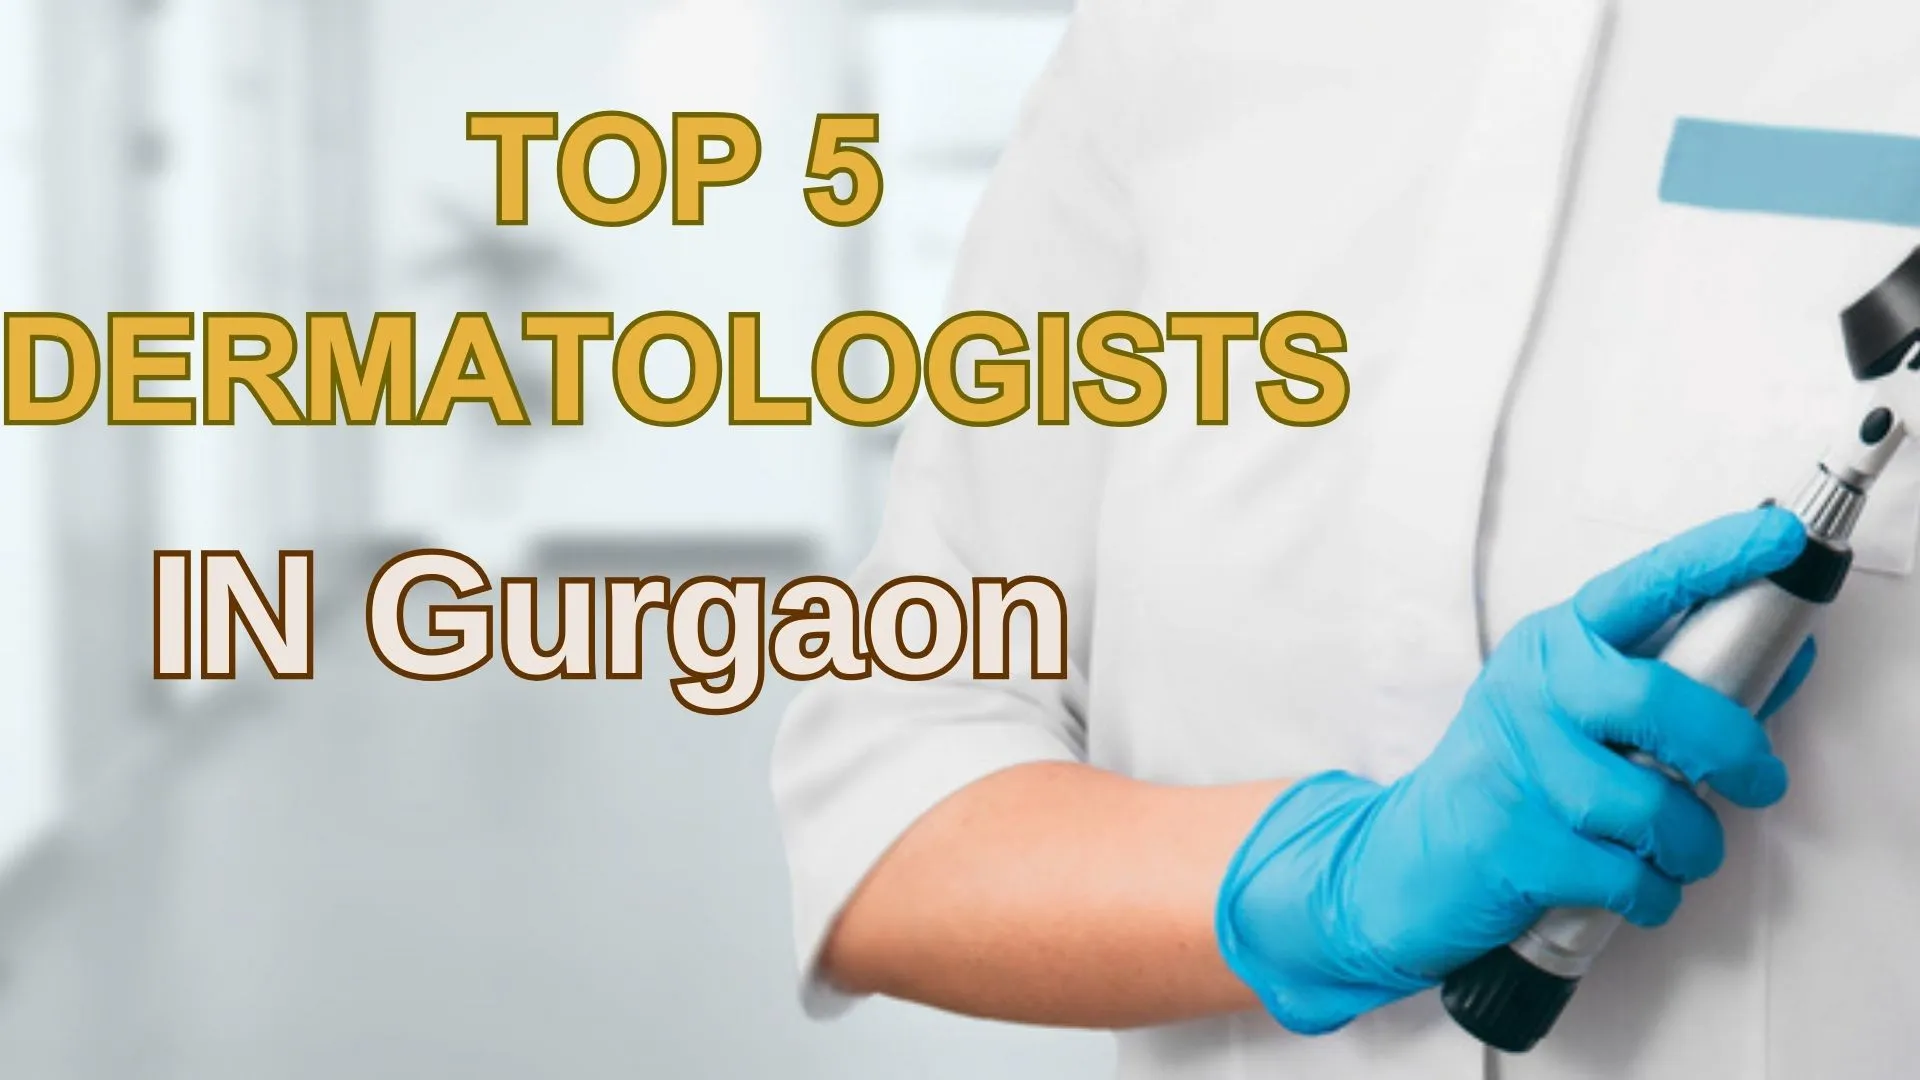 Top 5 Dermatologists in Gurgaon: A Comprehensive Guide for 2023